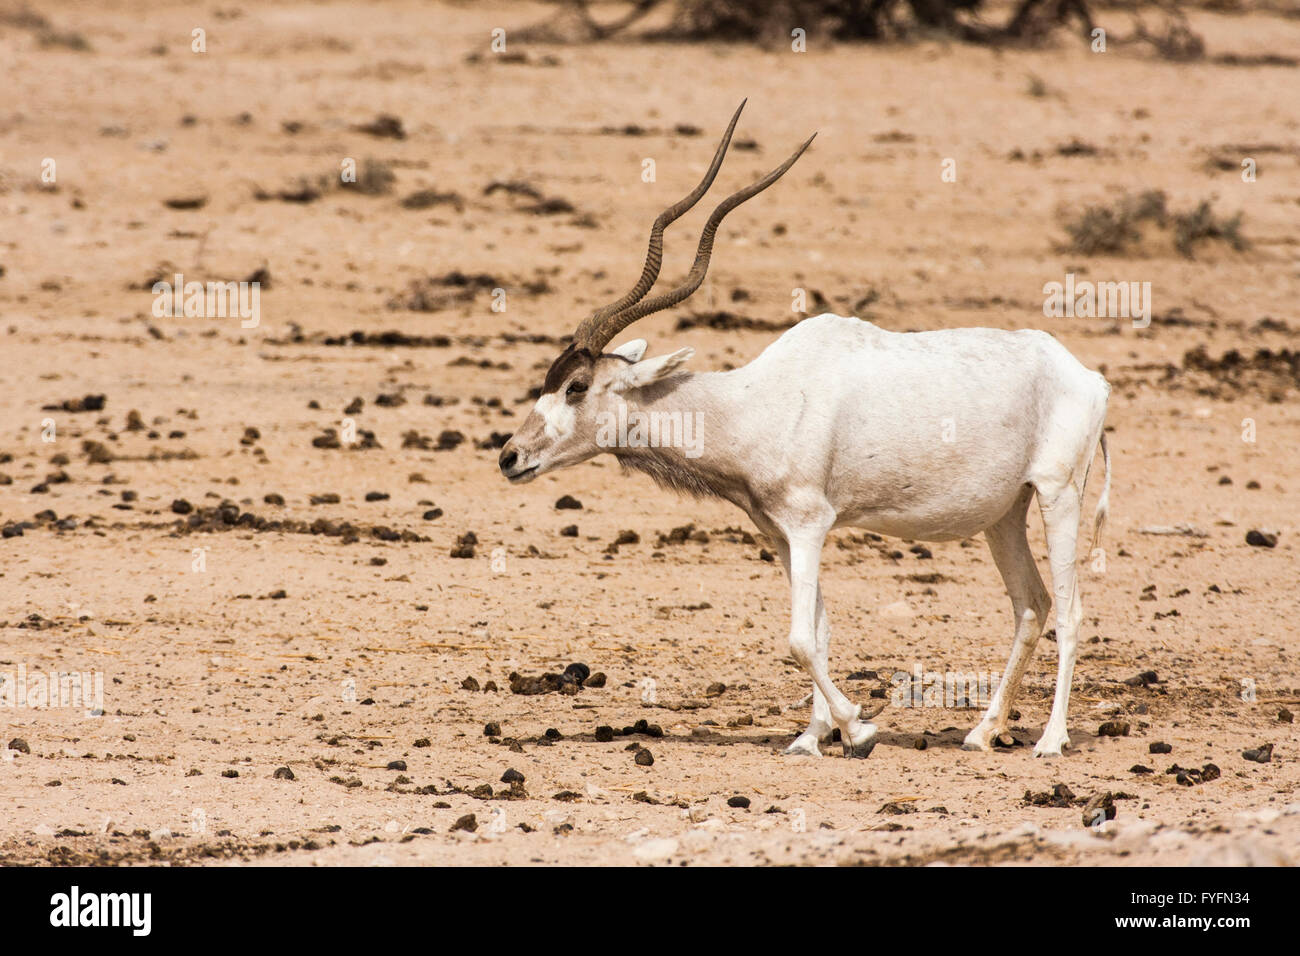 Addax (Addax nasomaculatus) in the Negev desert, Israel. Looking to camera Stock Photo